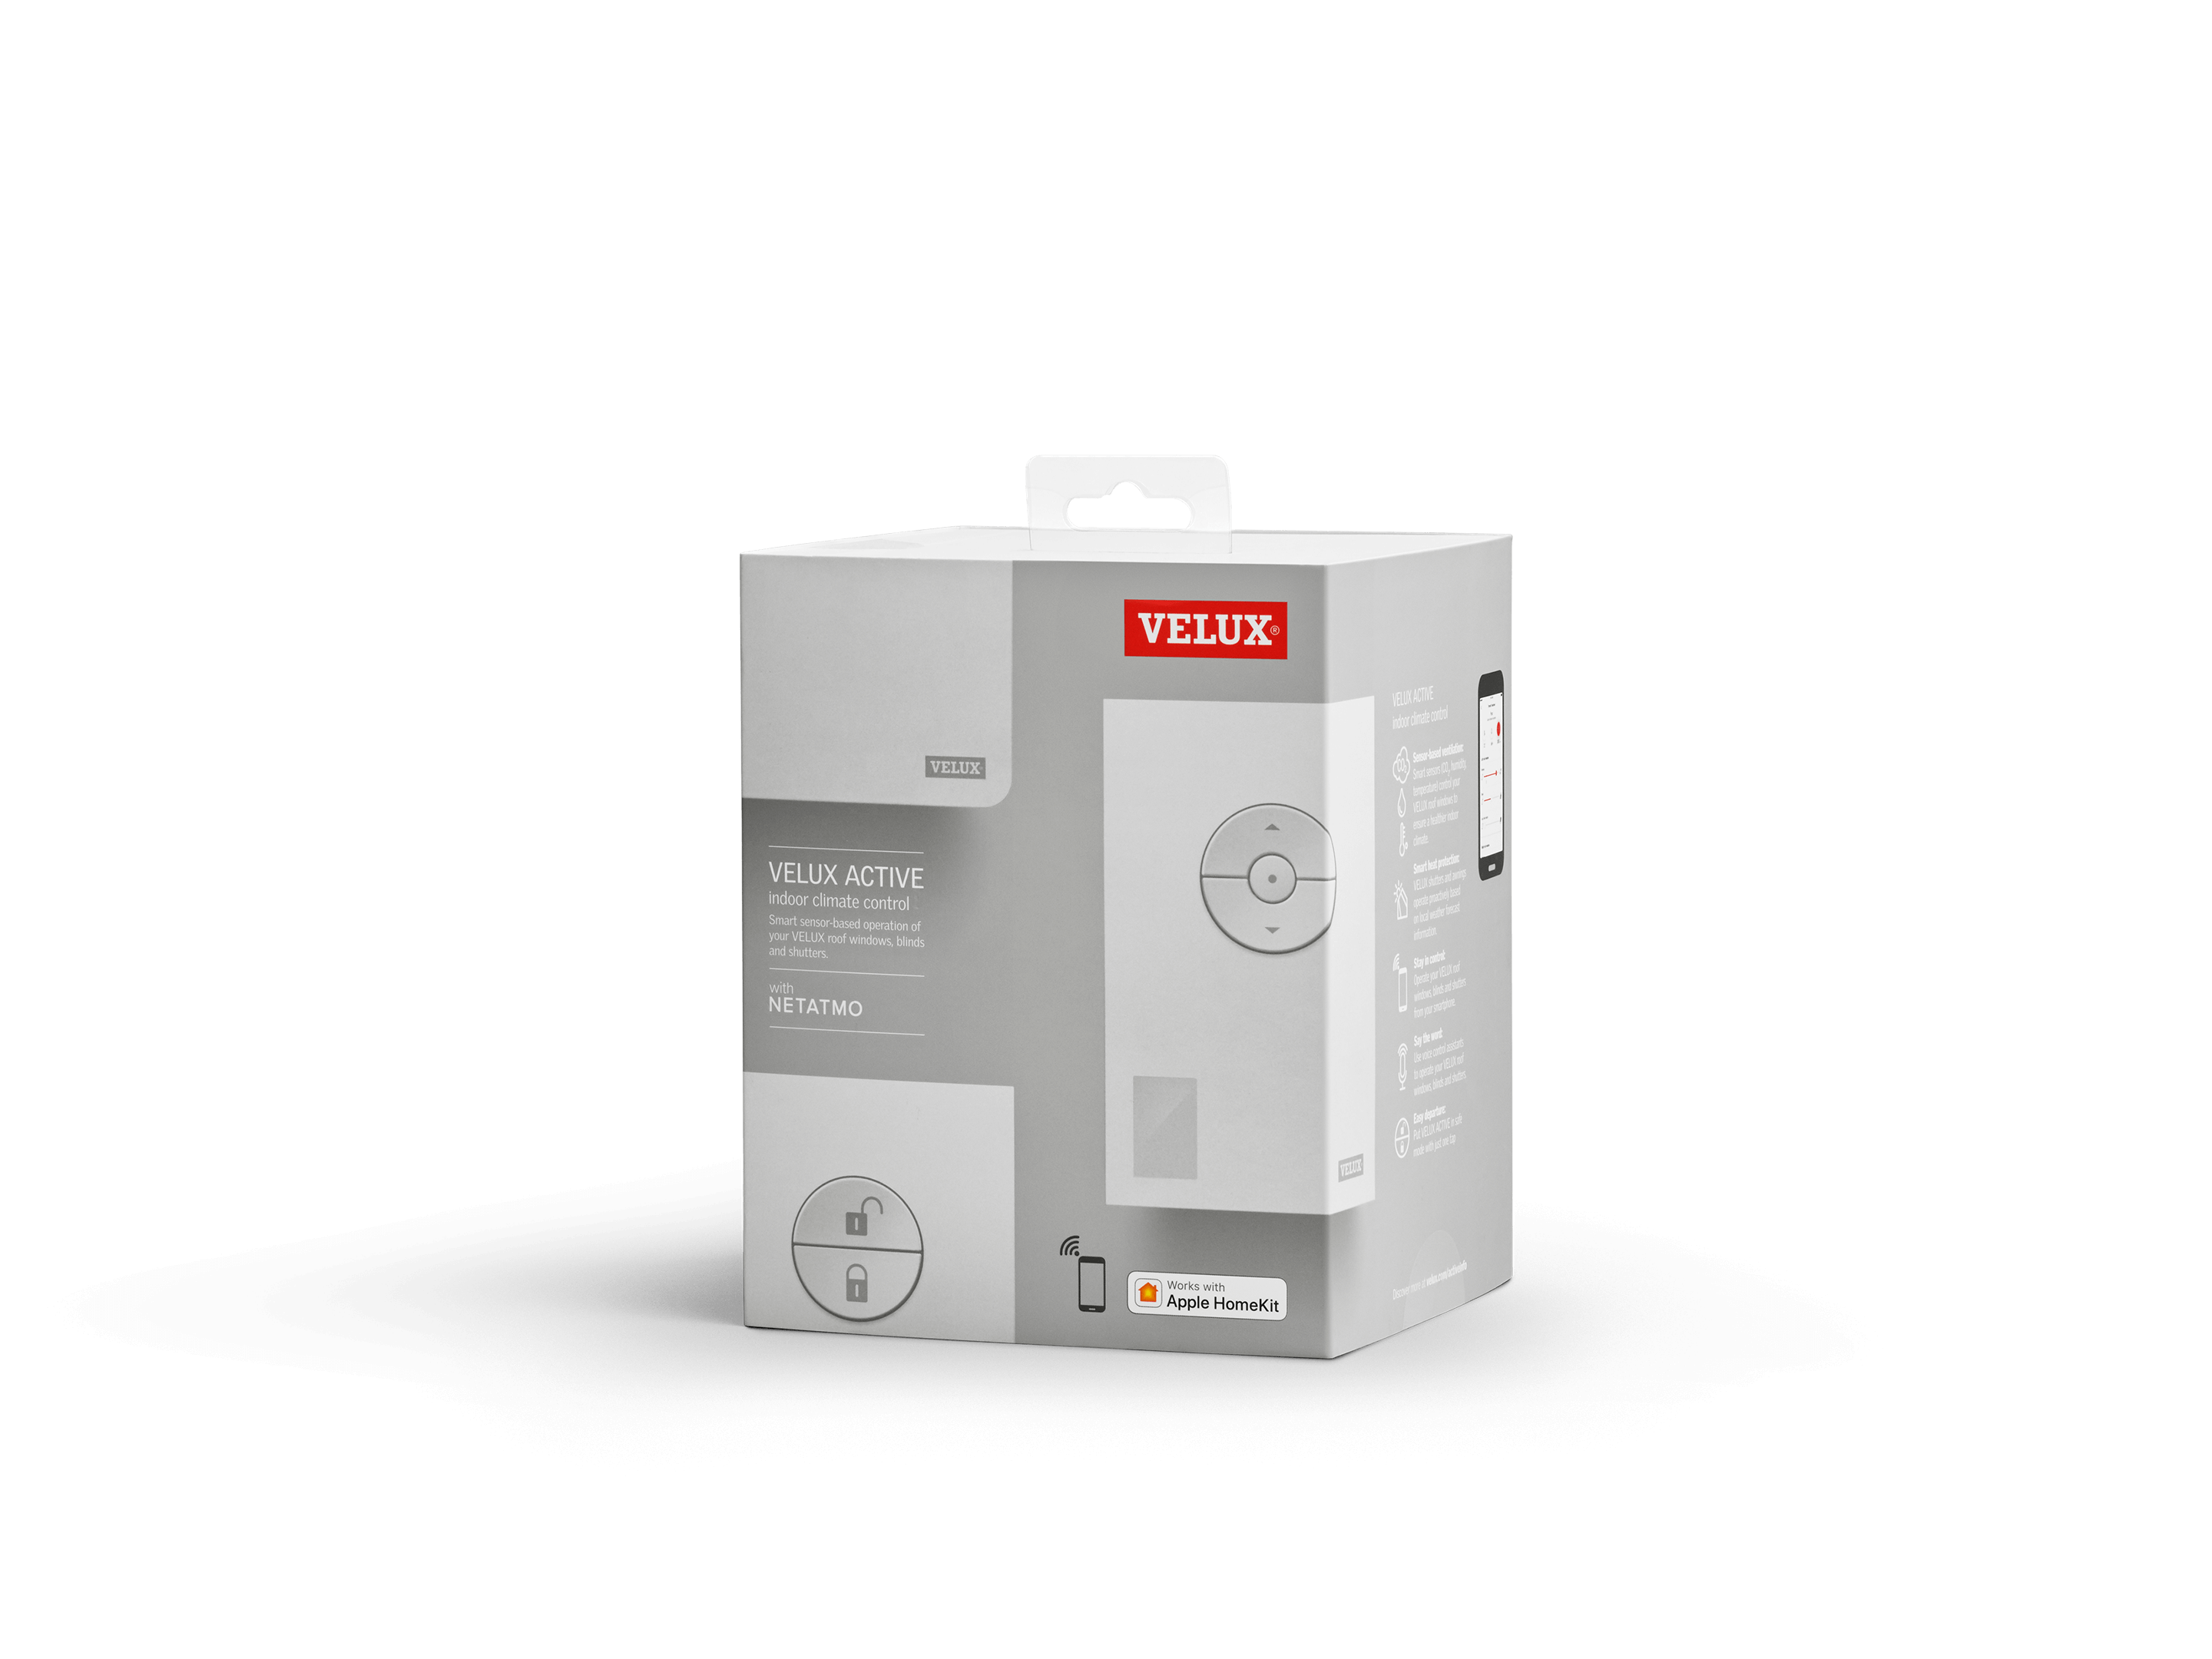 Image of packaging for VELUX ACTIVE Intelligent home control add-on accessory